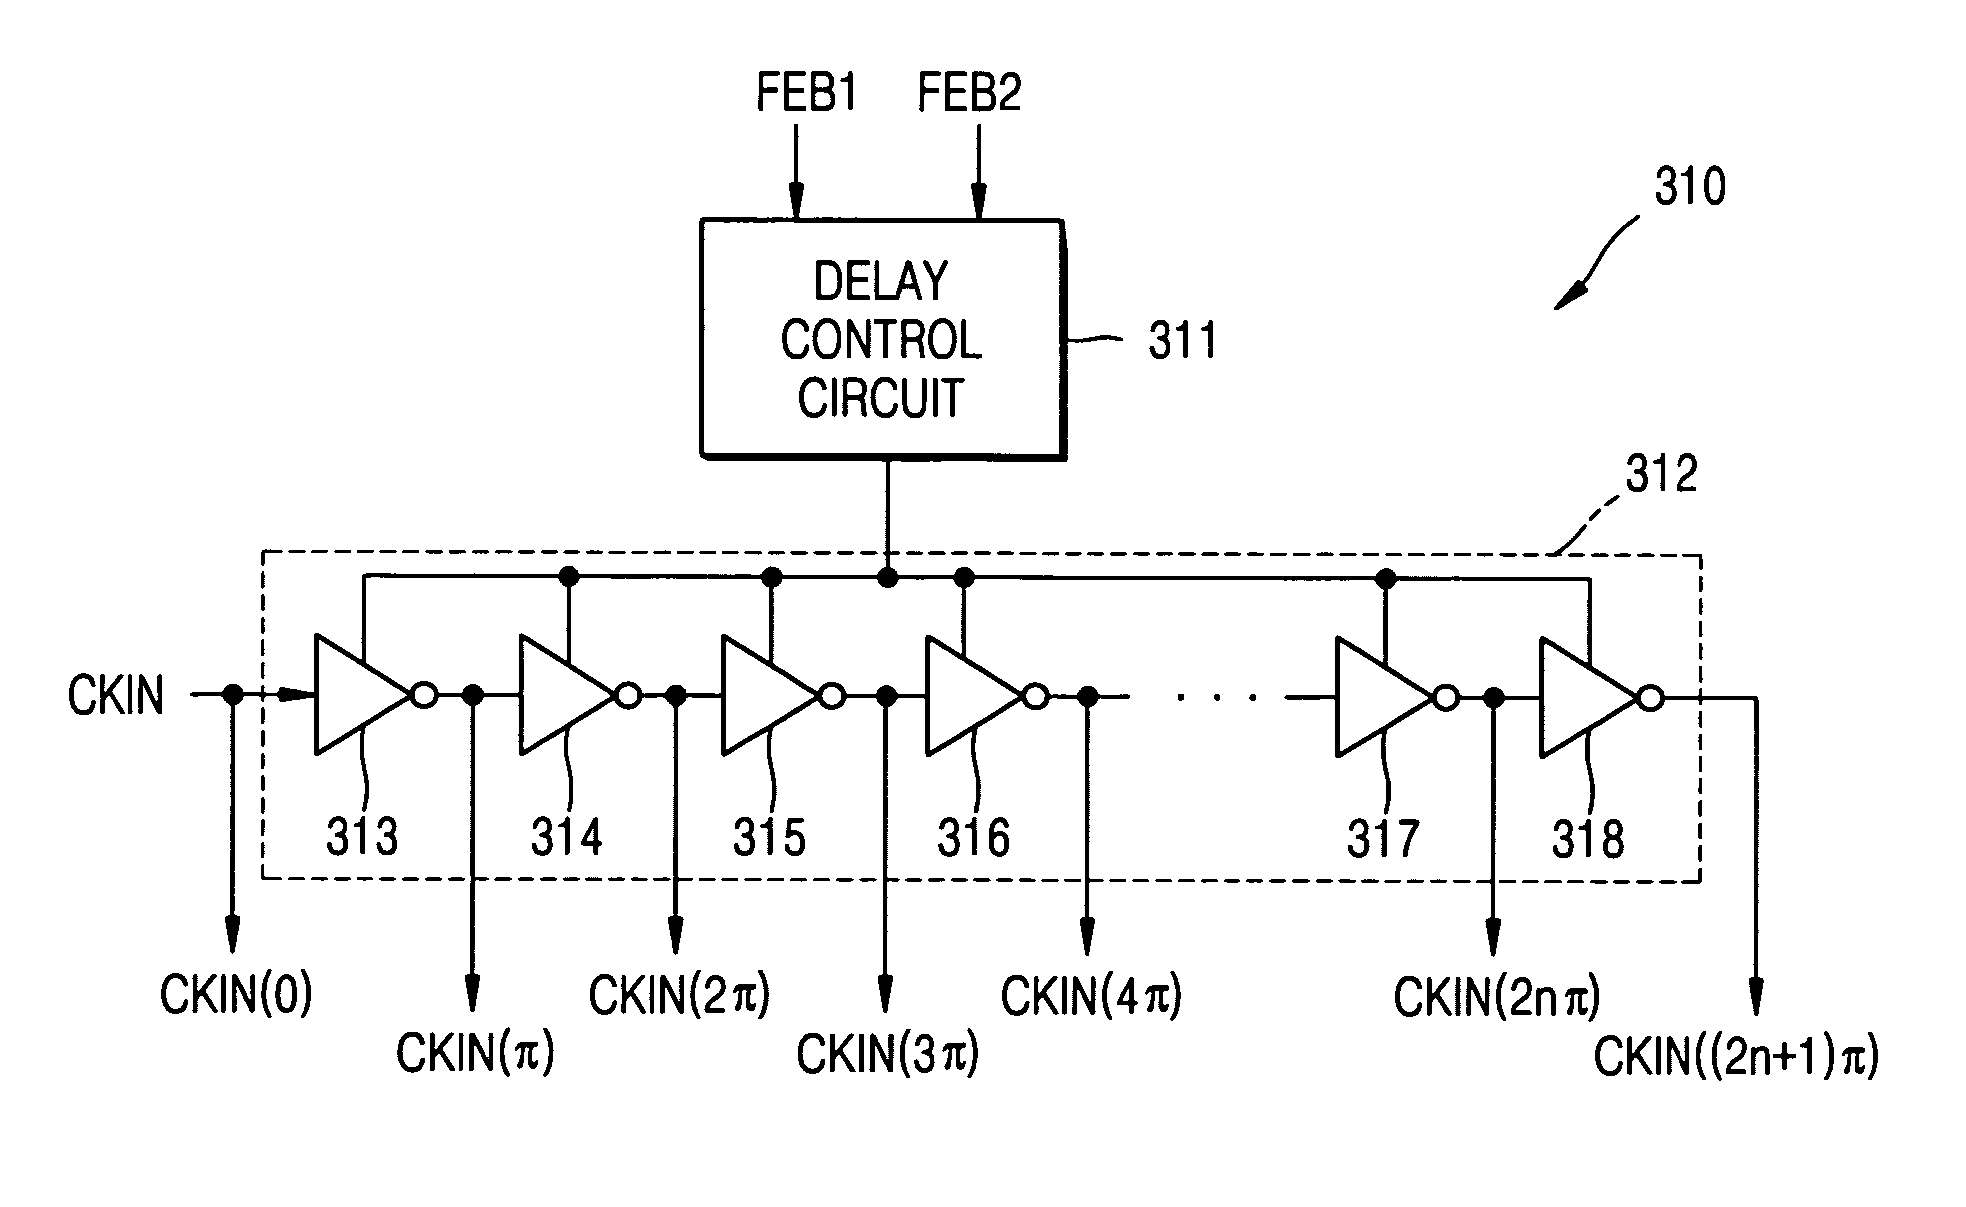 Clock signal generation circuits and methods using phase mixing of even and odd phased clock signals